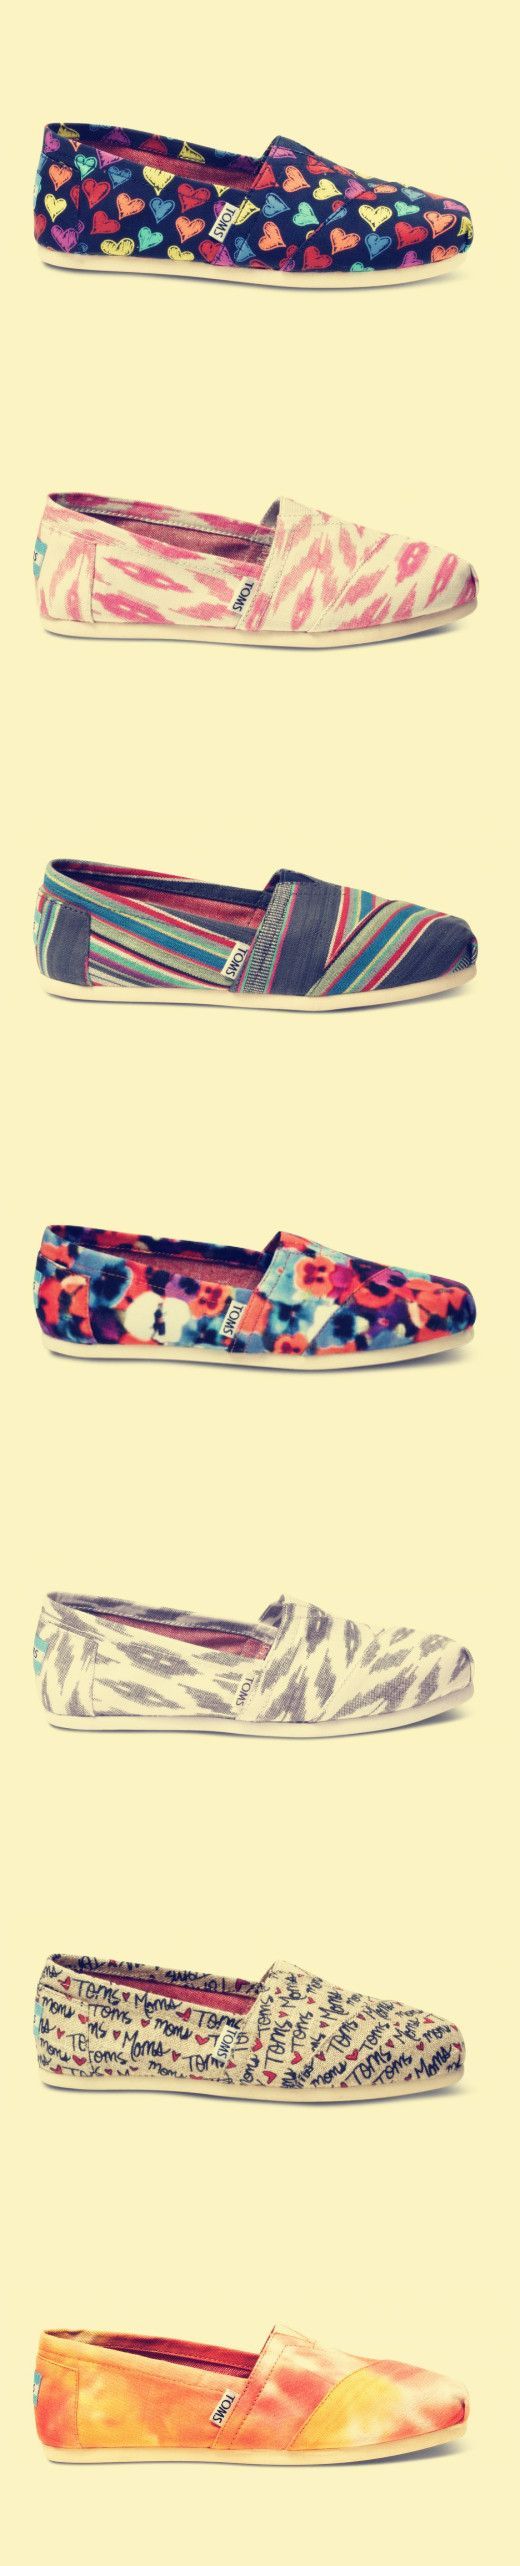 Toms Outlet! $19.99 OMG!! Holy cow, Im gonna love this site